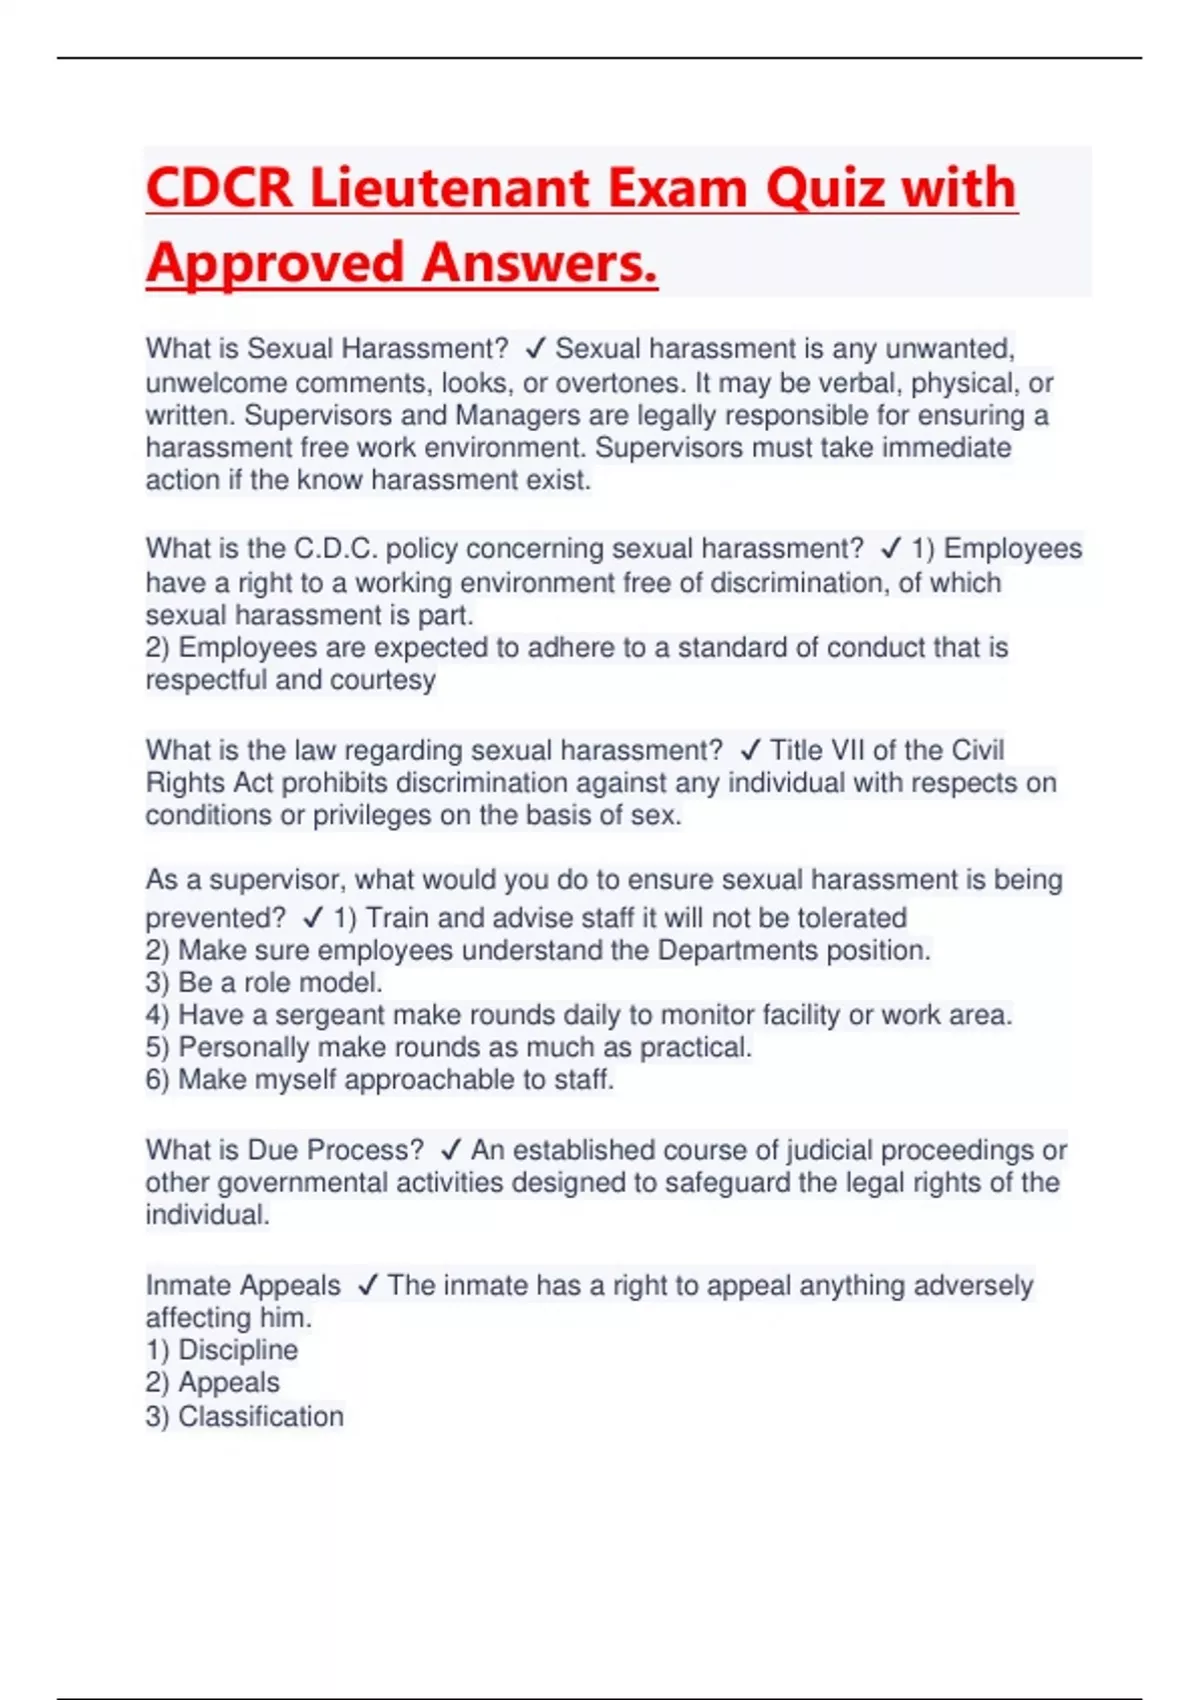 CDCR Lieutenant Exam Quiz with Approved Answers Latest 2023/2024